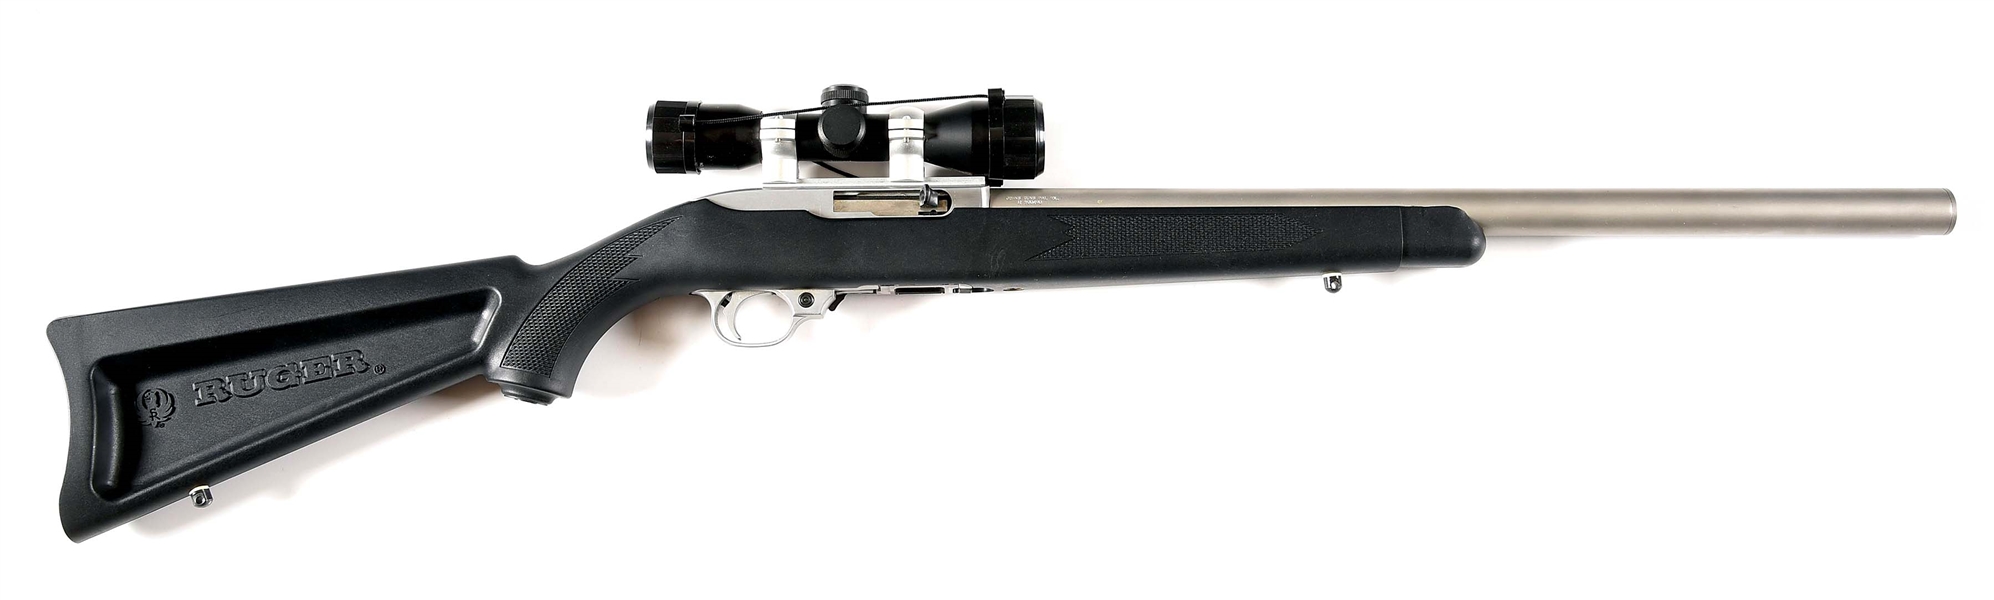 (N) STAINLESS STEEL RUGER 10/22 SEMI-AUTOMATIC CARBINE WITH INTEGRAL JOHNS GUNS SILENCER (SILENCER).